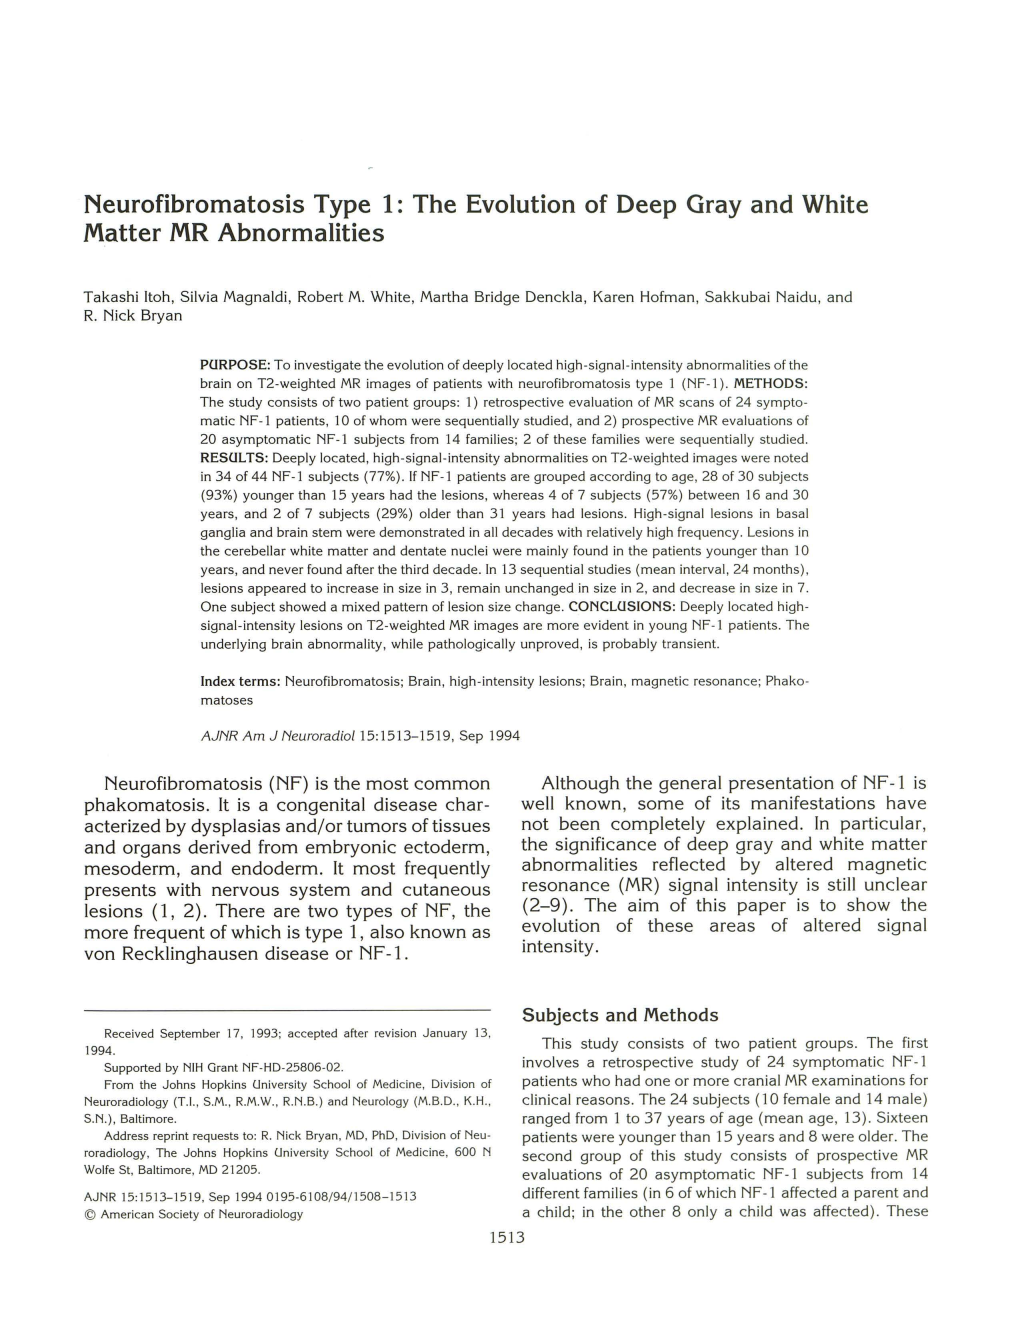 The Evolution of Deep Gray and White Matter MR Abnormalities